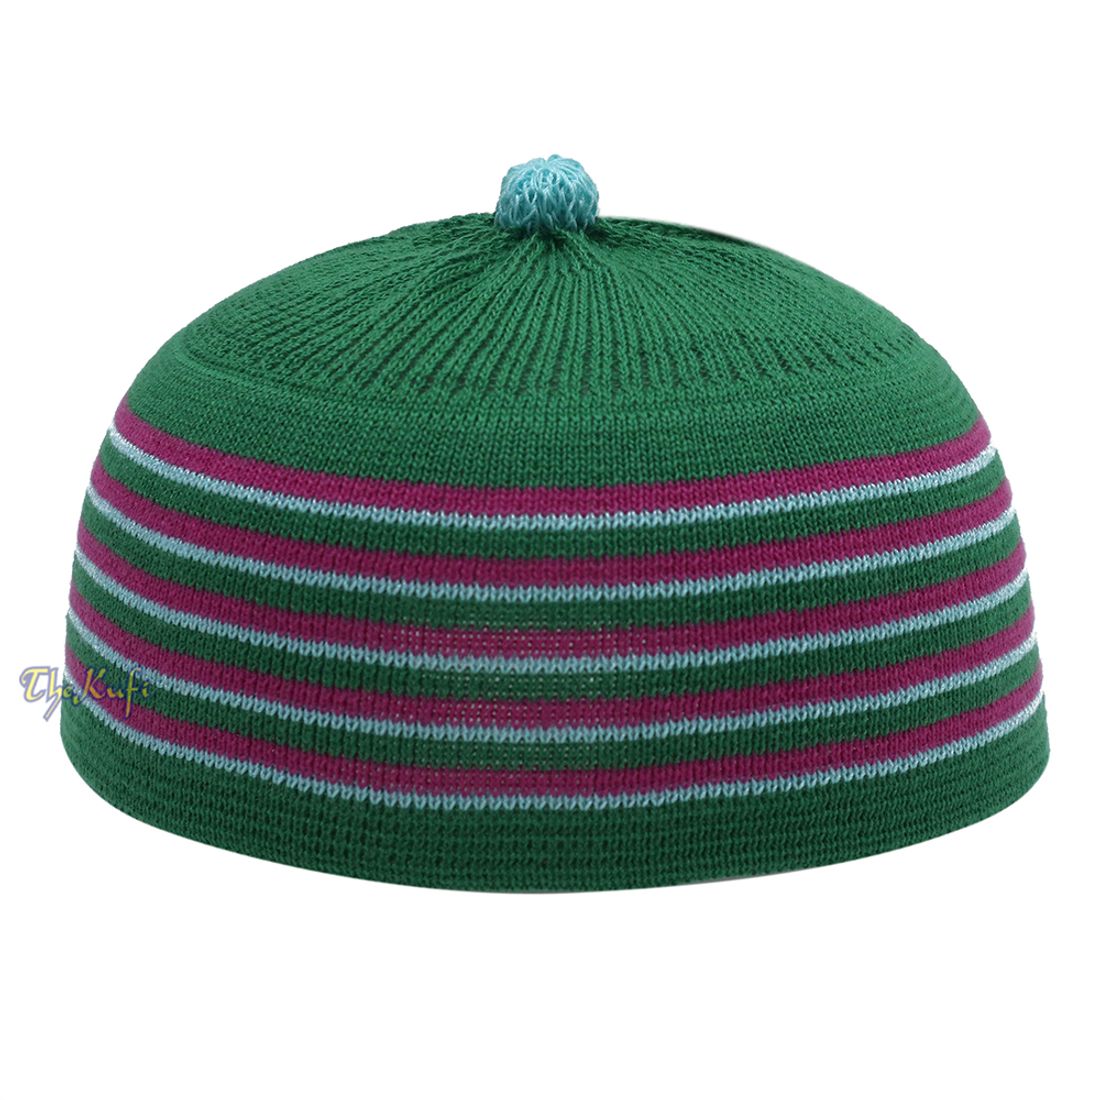 Green with Hot Pink and Turquoise Lines Baby or Infant Kufi Pompom Stretchable Beanie